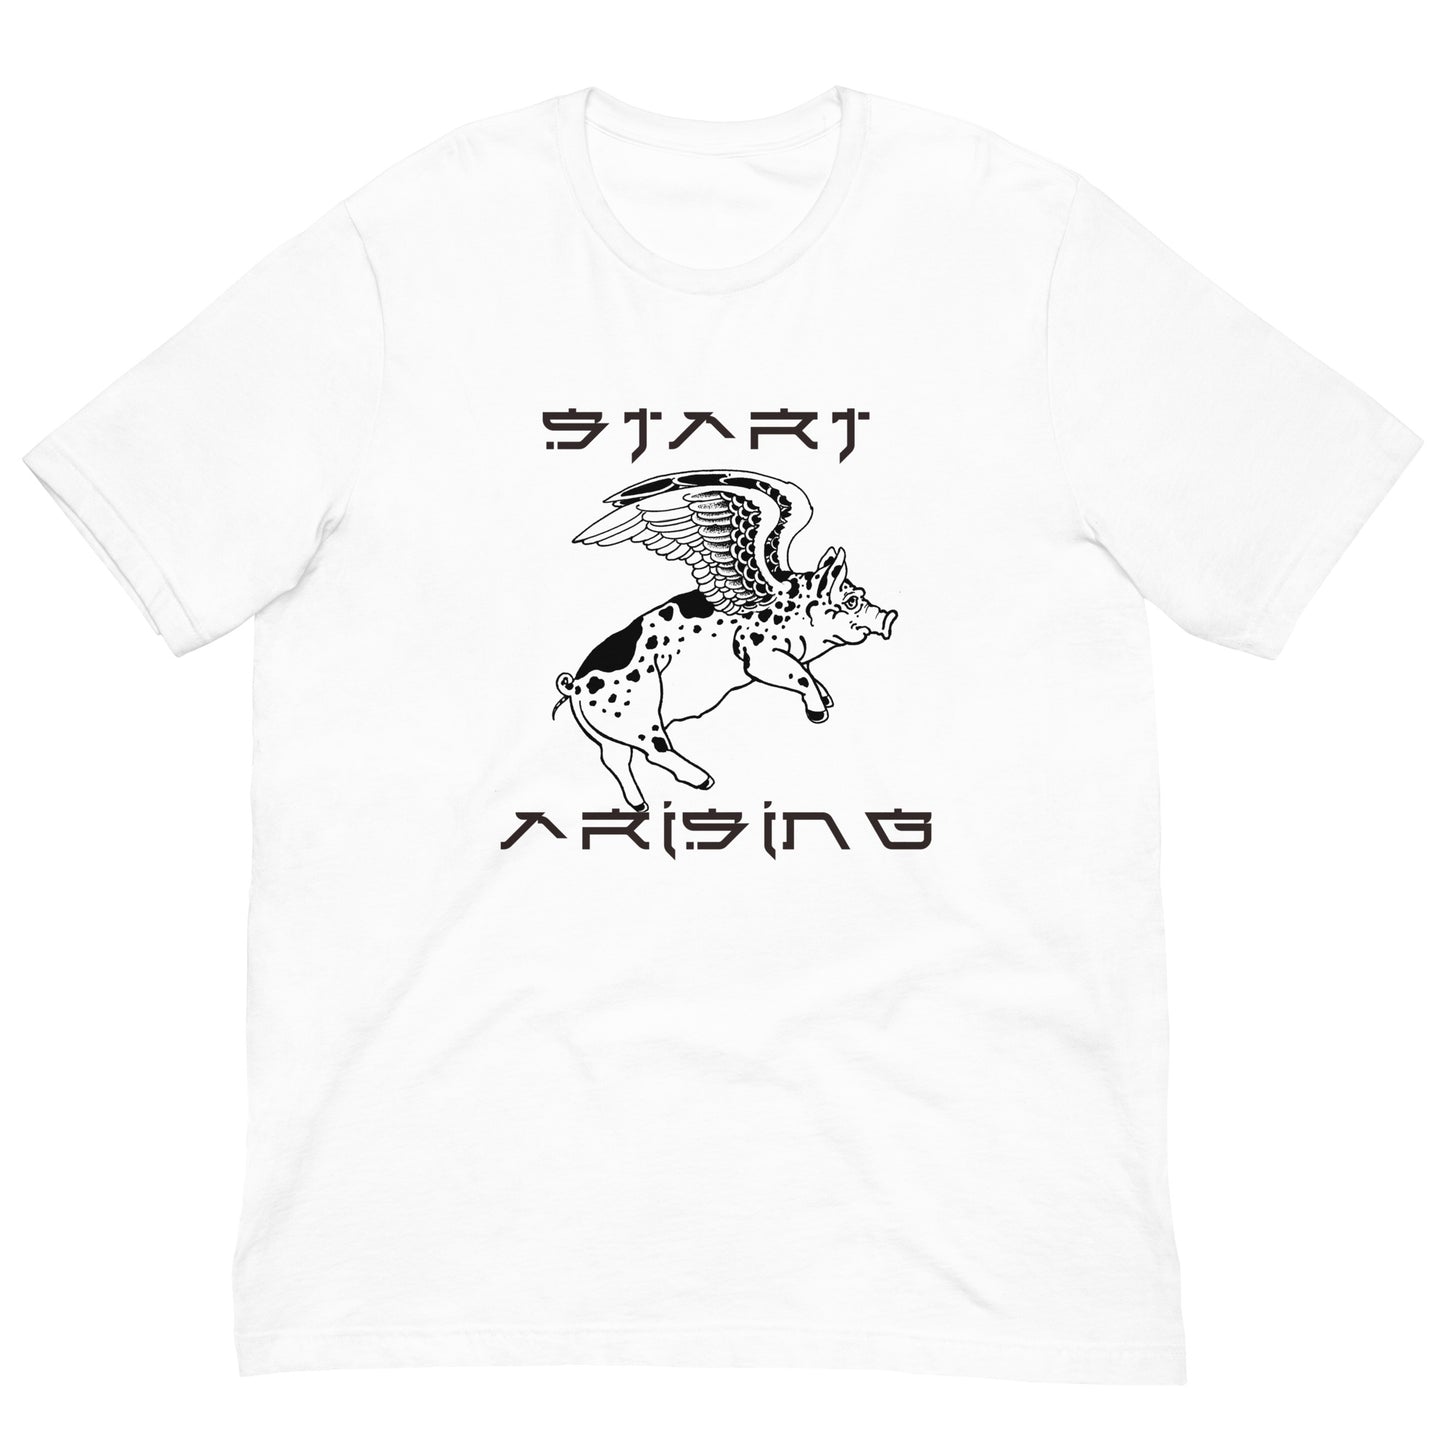 When pigs fly t-shirt